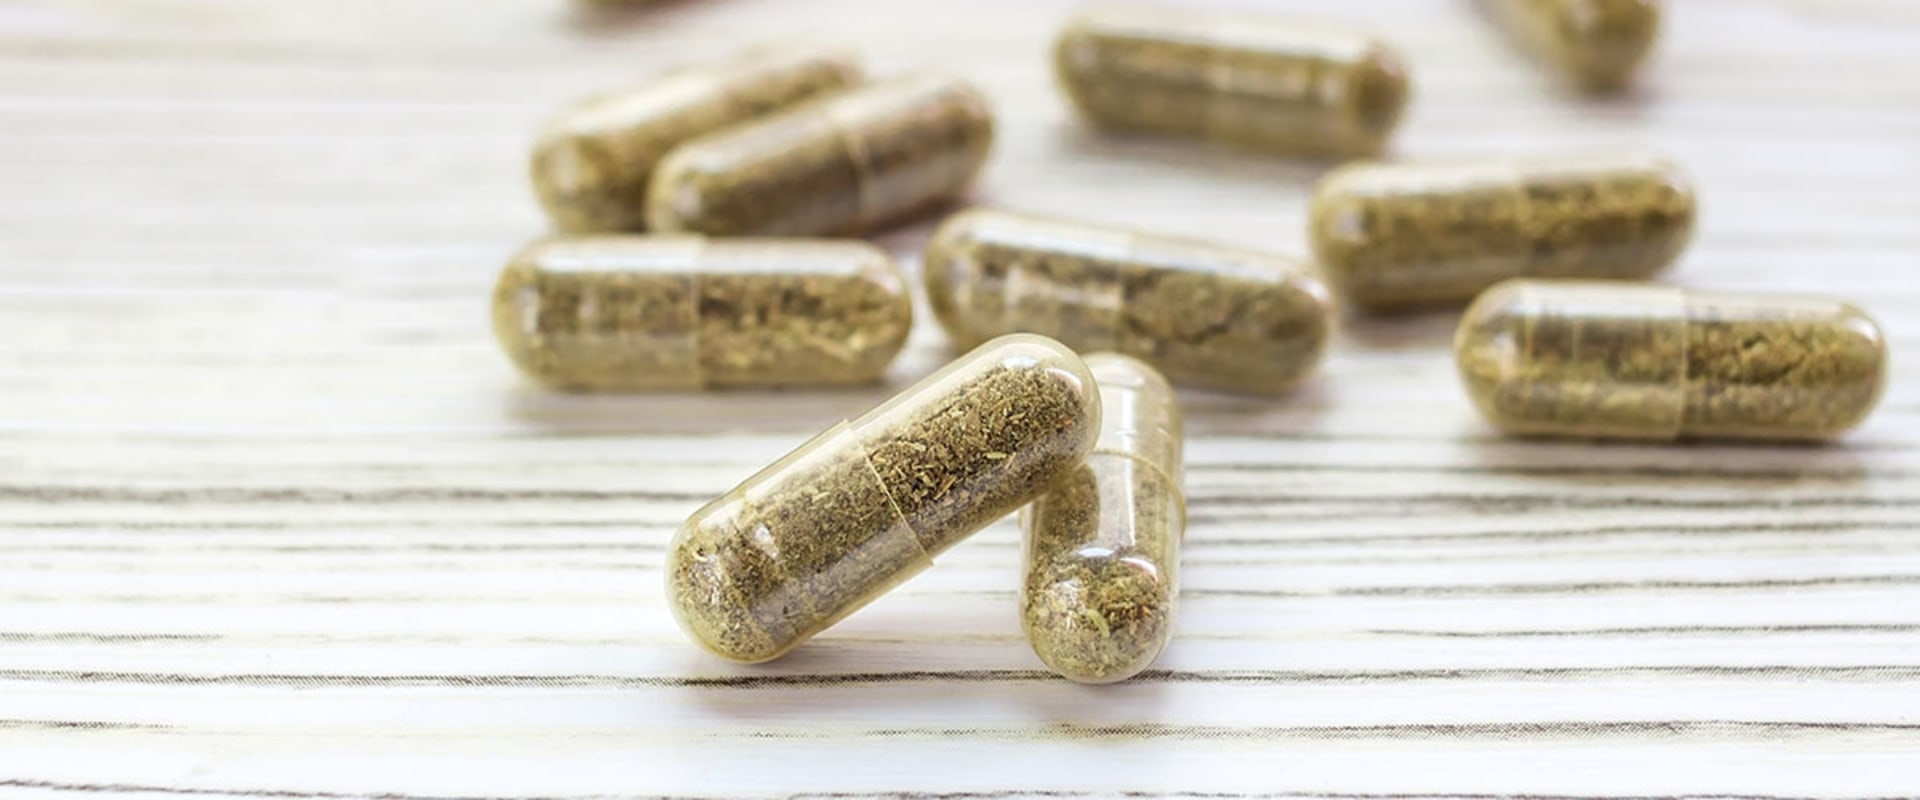 Are there any health risks associated with consuming capsules made with wax thc orally?